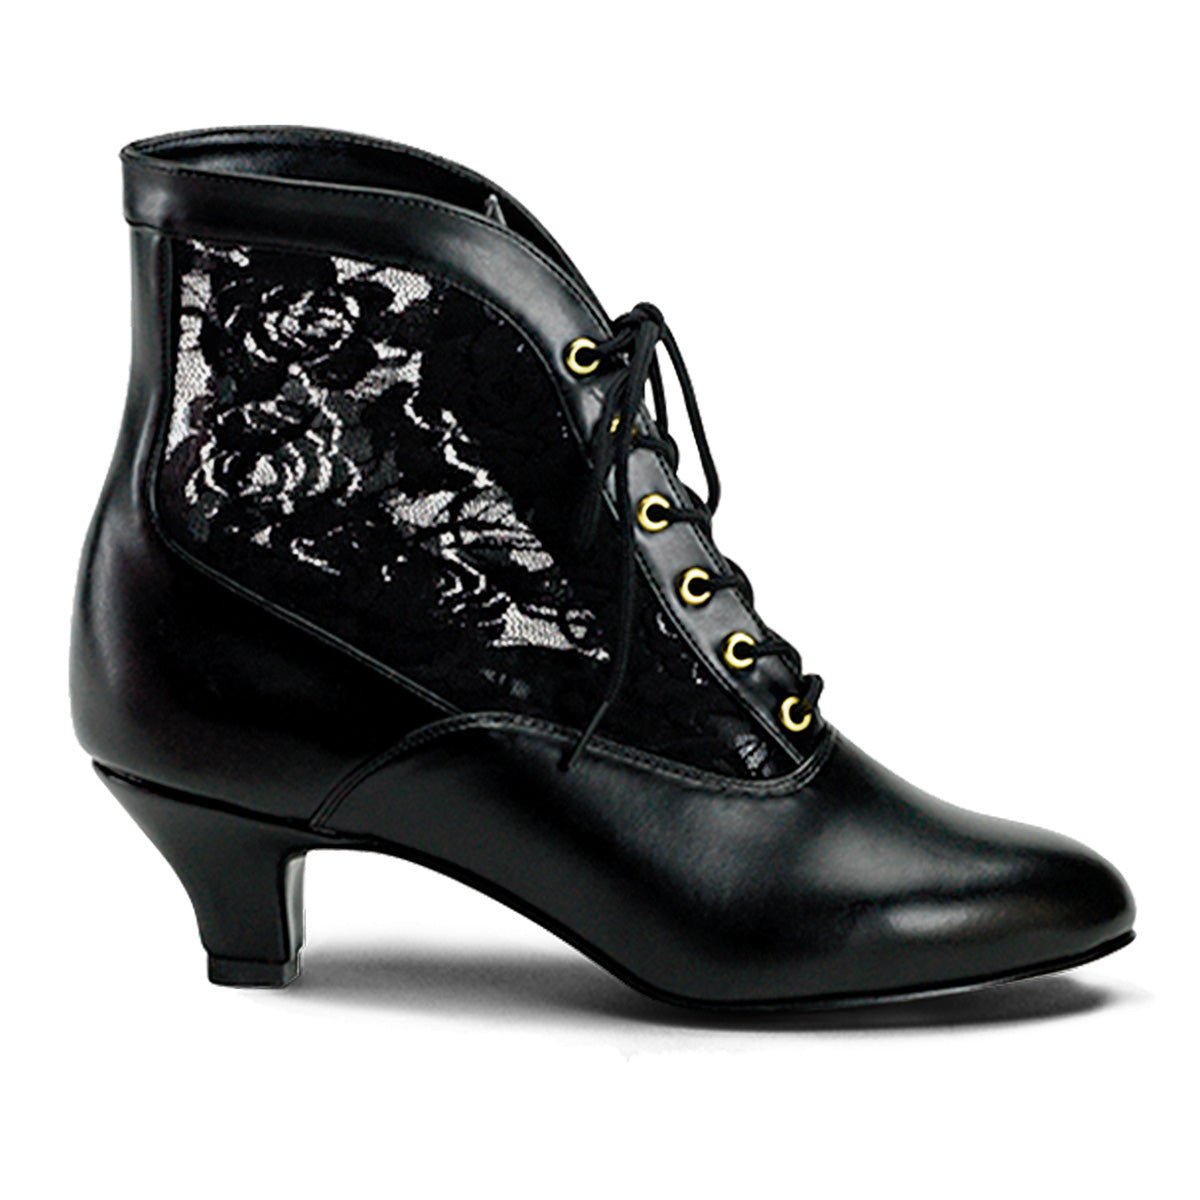 Clearance Funtasma Dame 05 Black Size 6UK/9USA - From Clearance Sold By Alternative Footwear